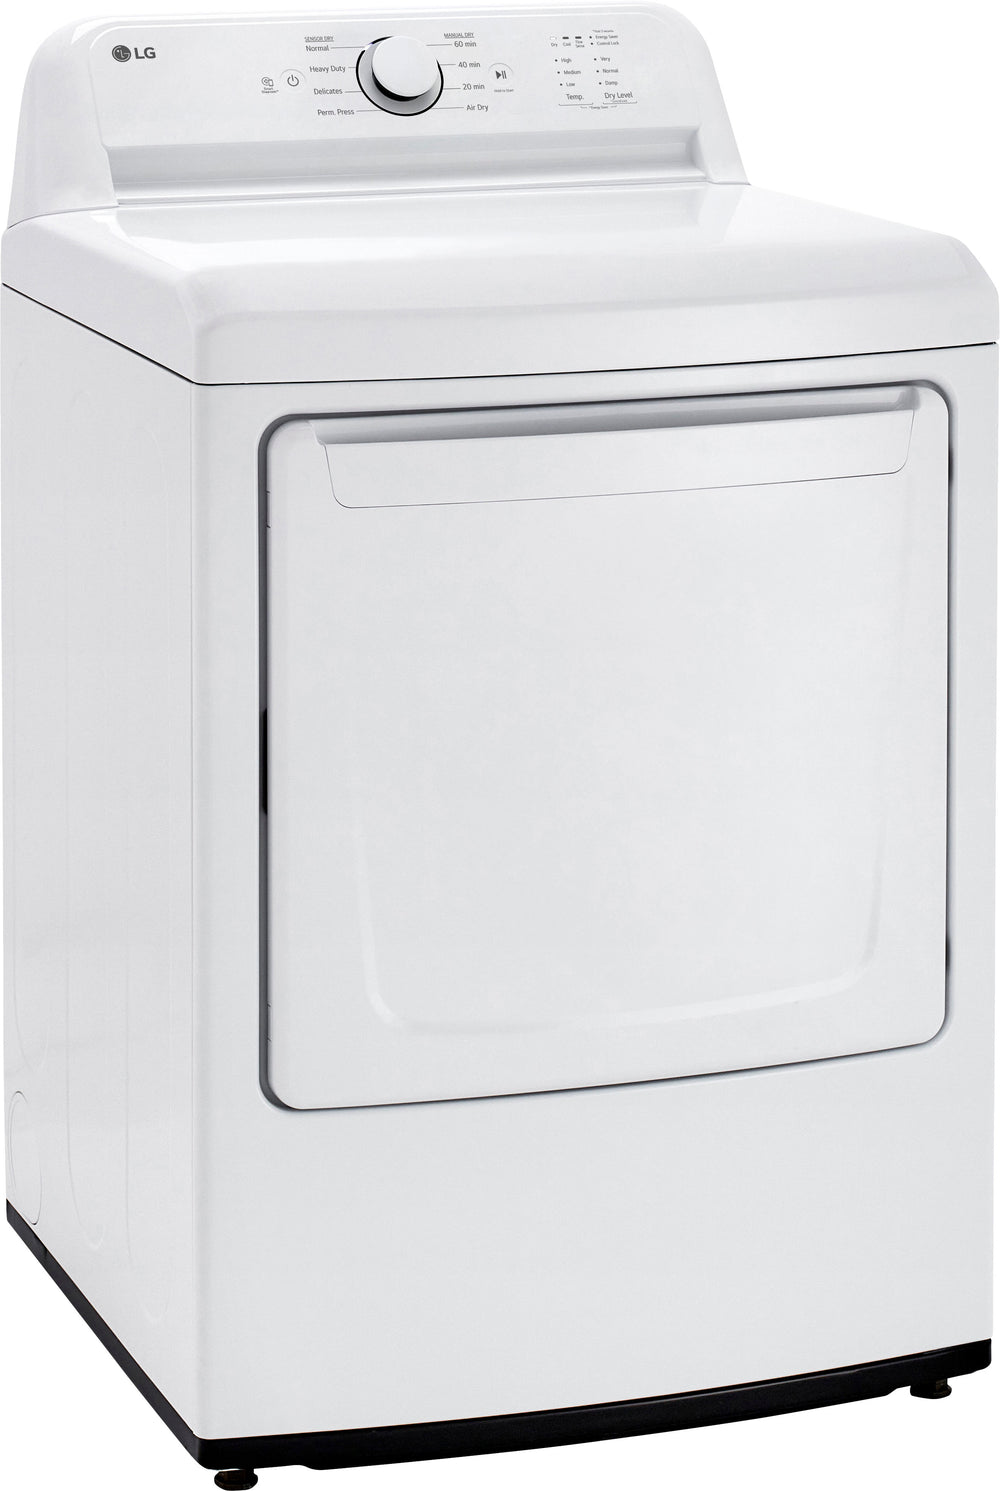 LG - 7.3 Cu. Ft. Smart Gas Dryer with Sensor Dry - White_1